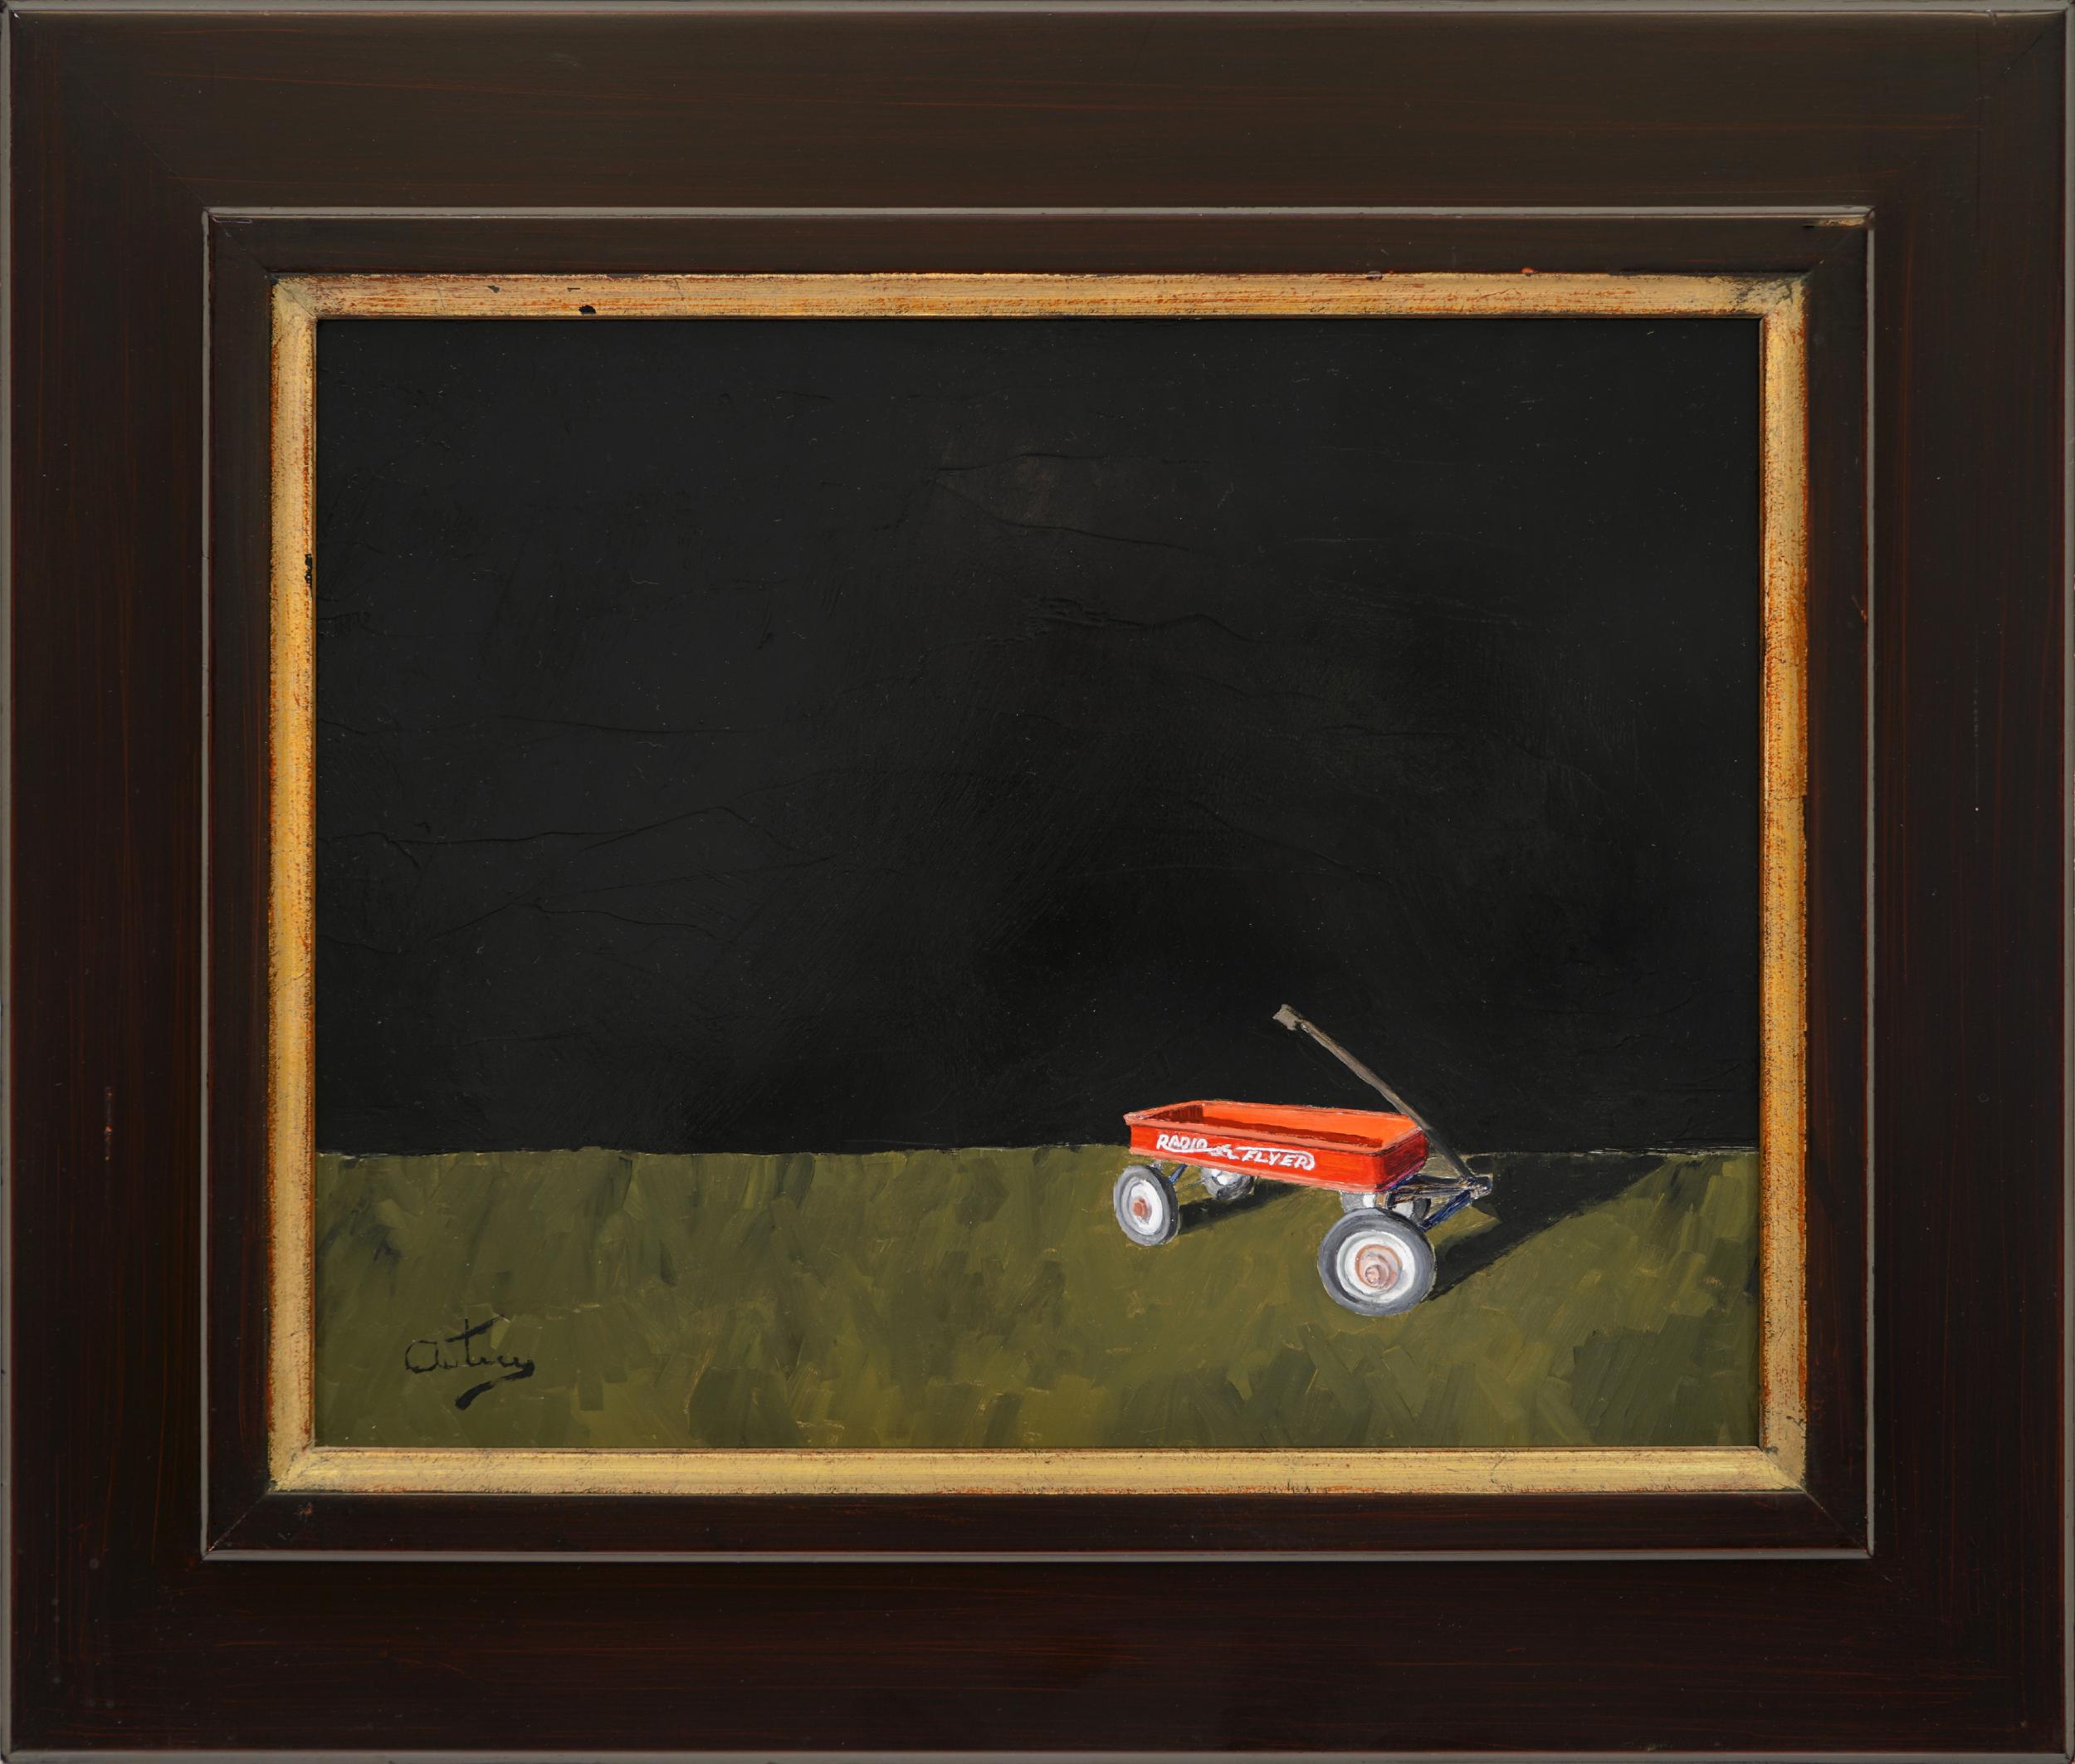 DONE FOR THE DAY WITH MY RADIO FLYER  Realist  Light and  Shadow Oil on Panel - Painting by Luke Autrey